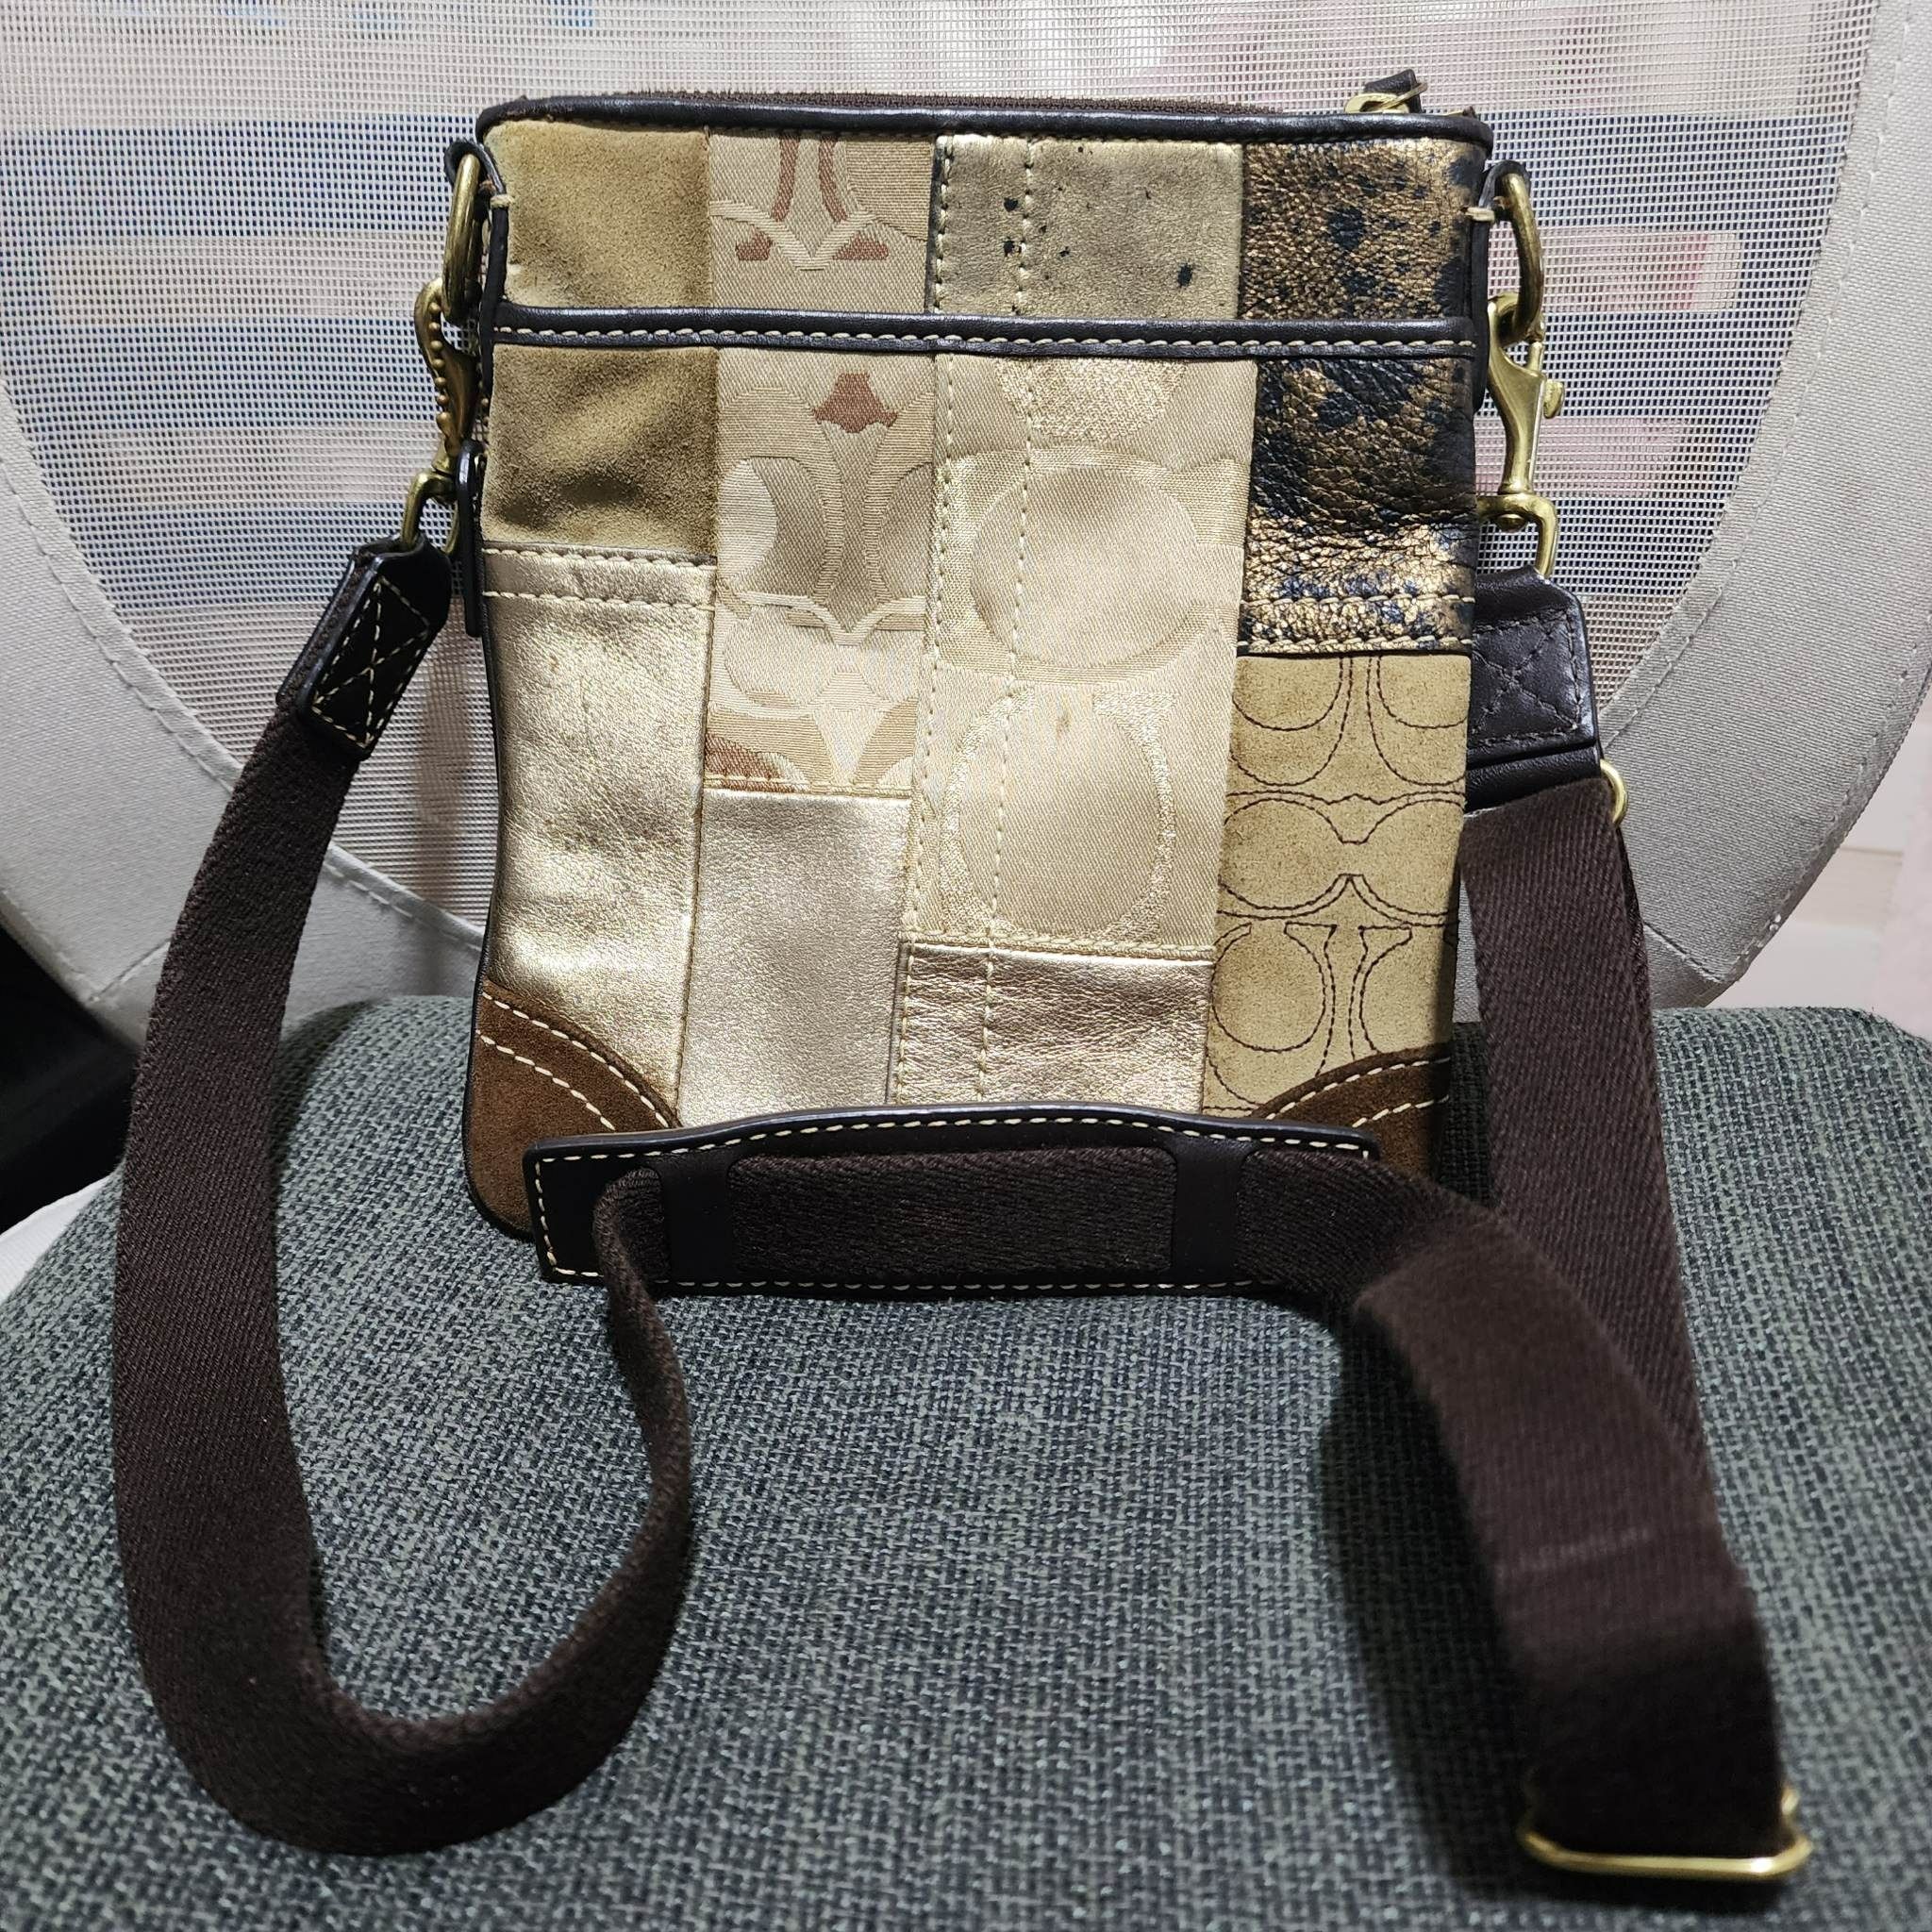 Original Coach Sling Bag, Luxury, Bags & Wallets on Carousell